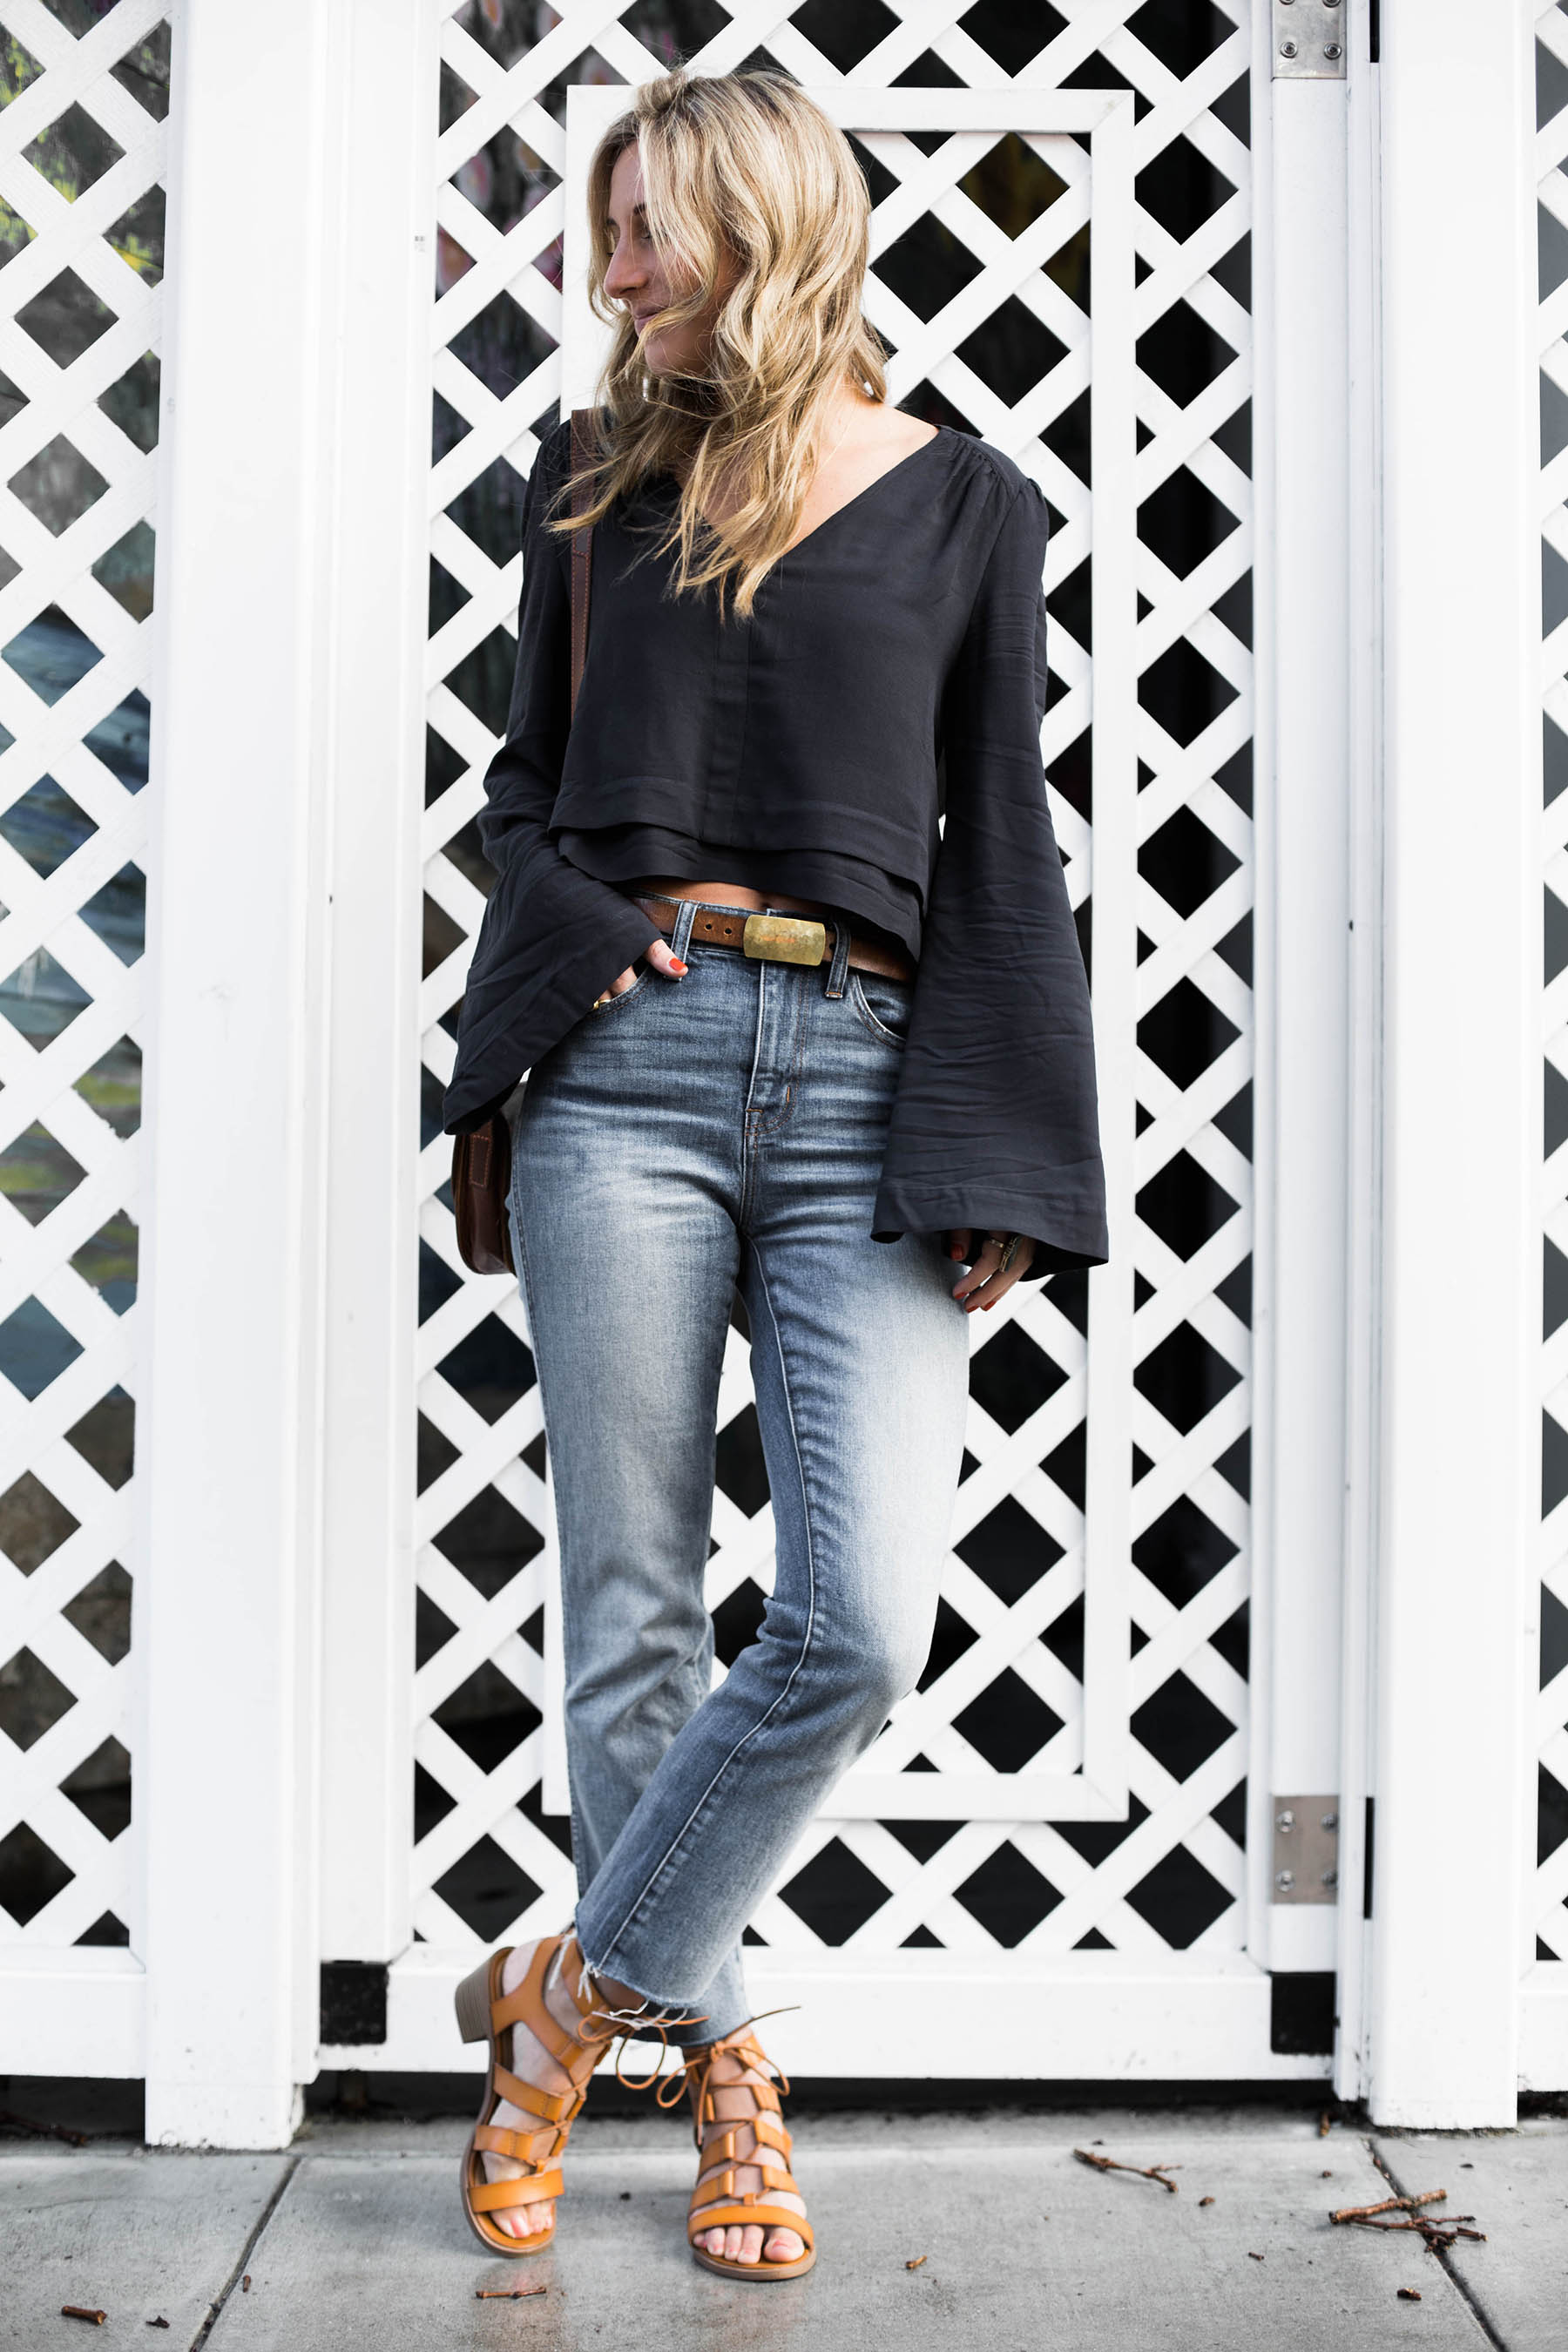 Amanda Holstein in spring outfit featuring Free People top, Madewell jeans, Old Navy sandals